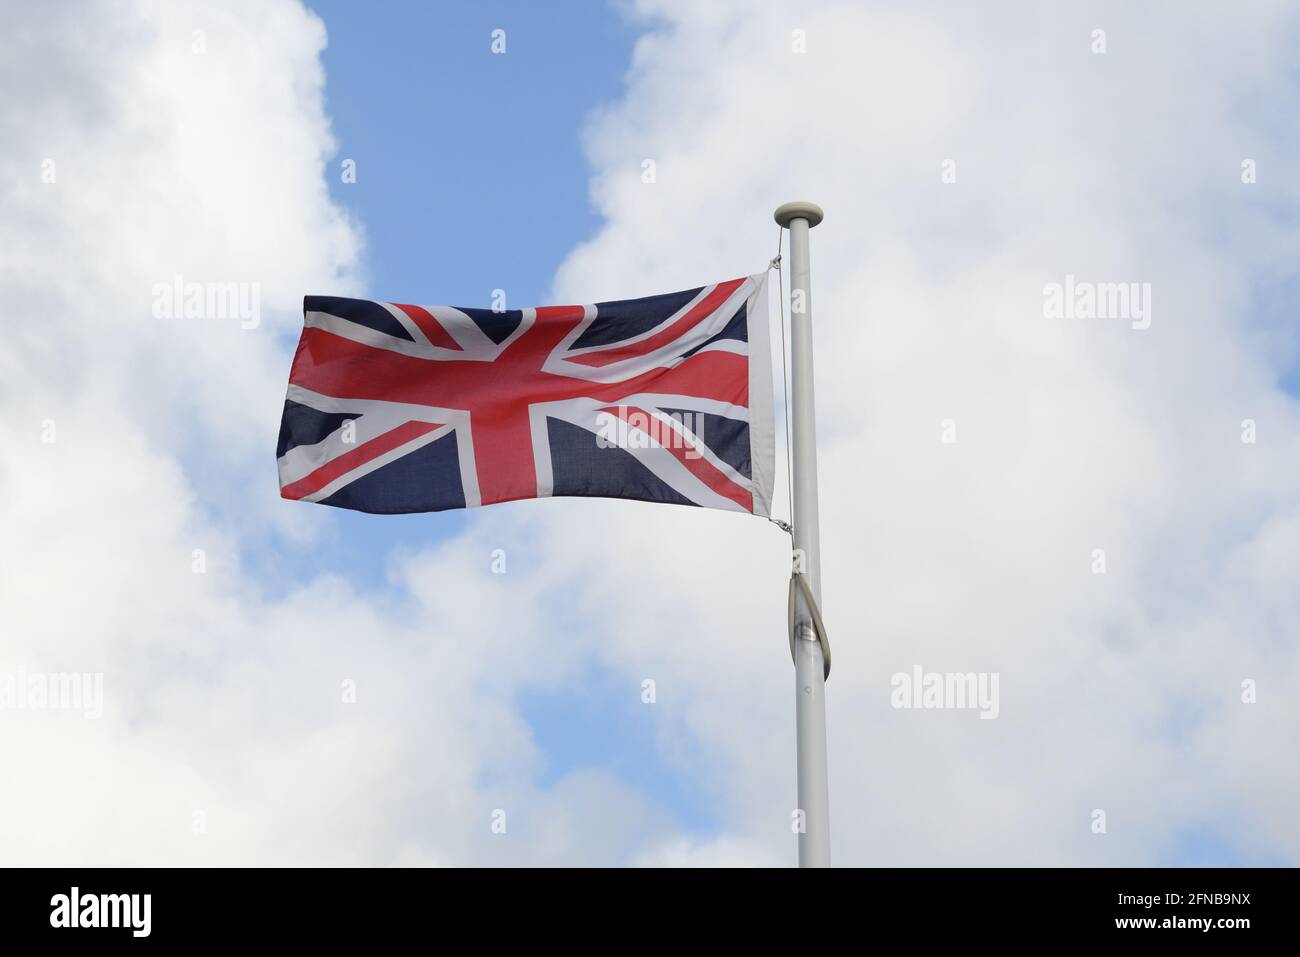 The Union Jack, or Union Flag, flying on a windy day, with bright blue sky and white clouds in the background Stock Photo